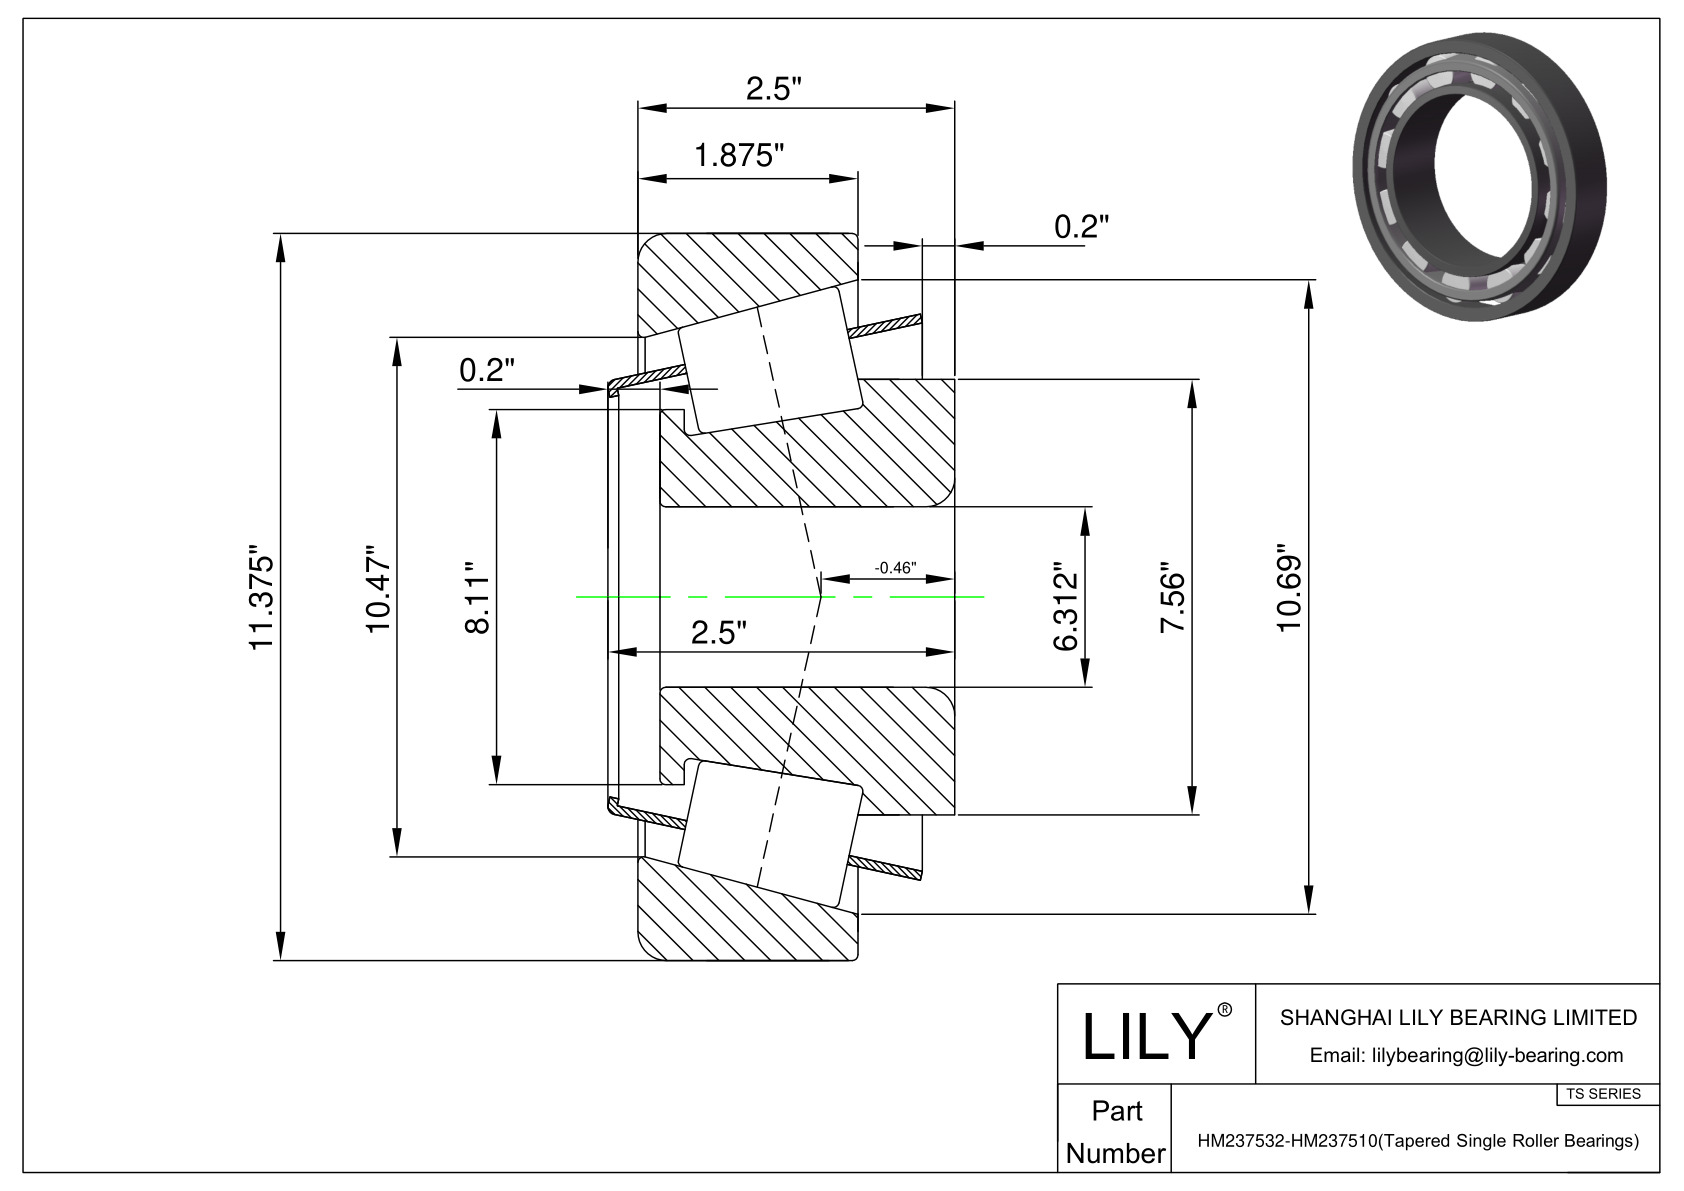 HM237532-HM237510 TS (Tapered Single Roller Bearings) (Imperial) cad drawing